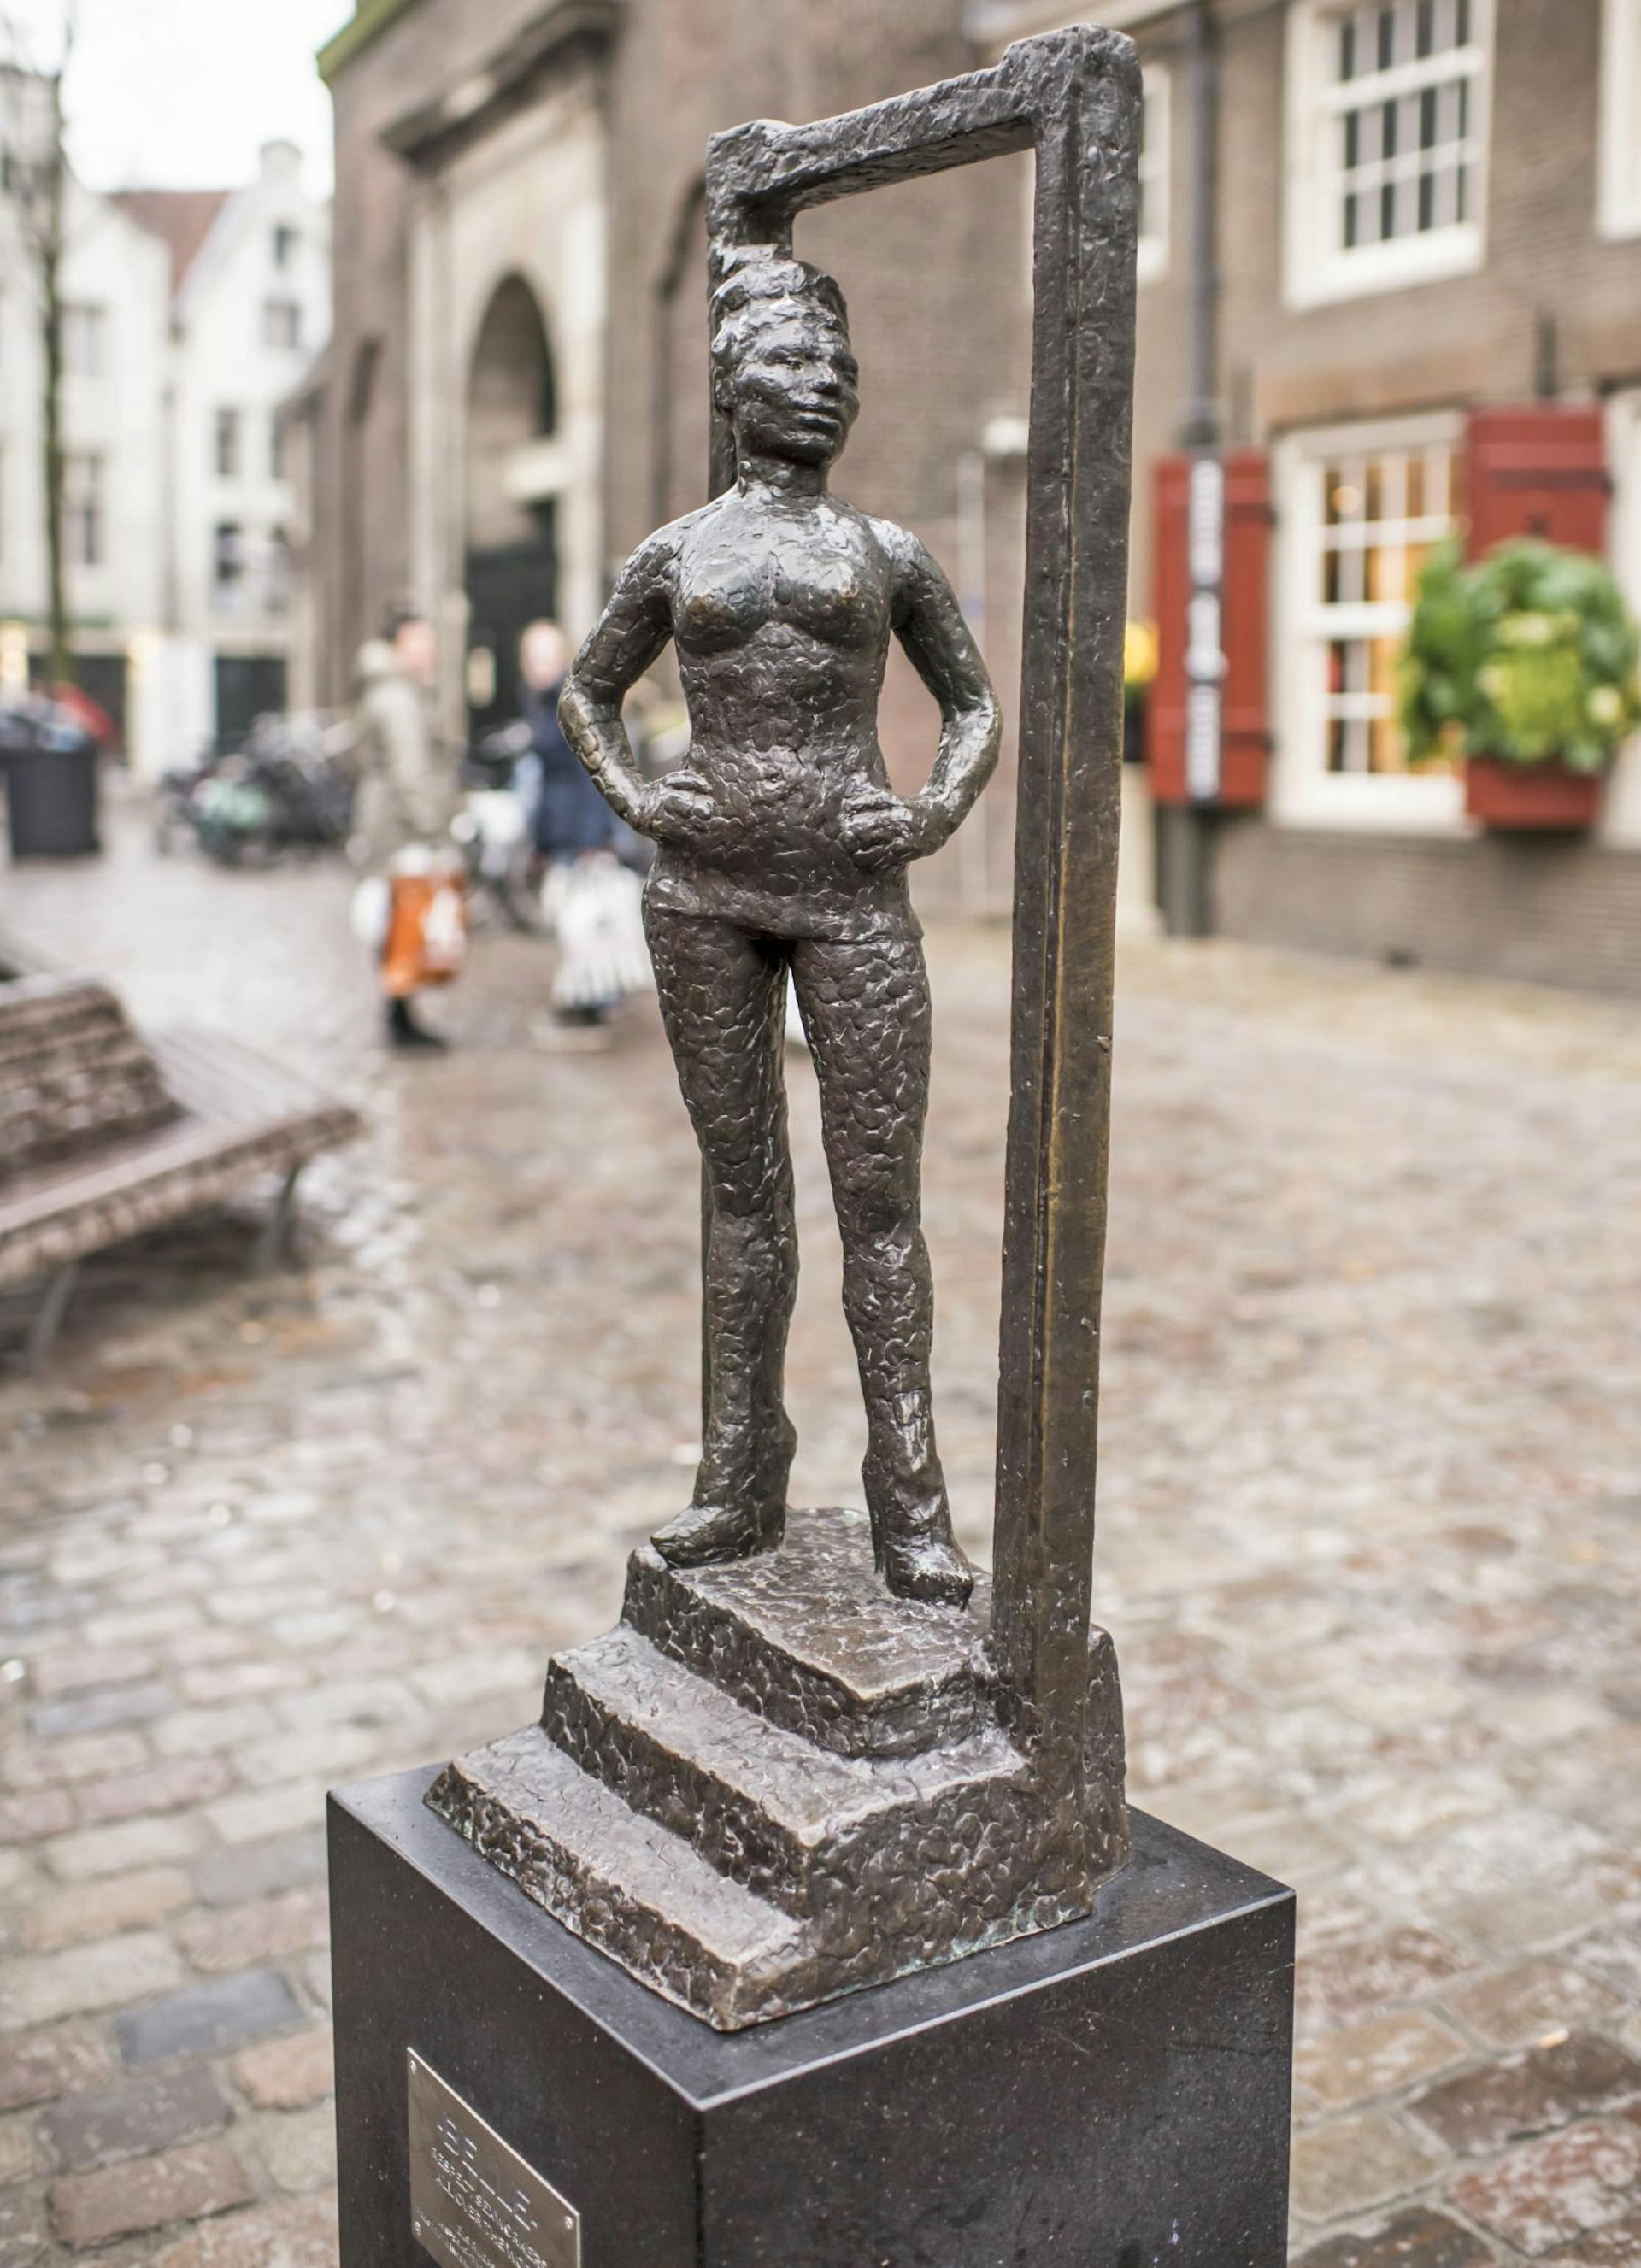 A statue depicting a commercial sex worker known as Belle in the Red Light District in Amsterdam